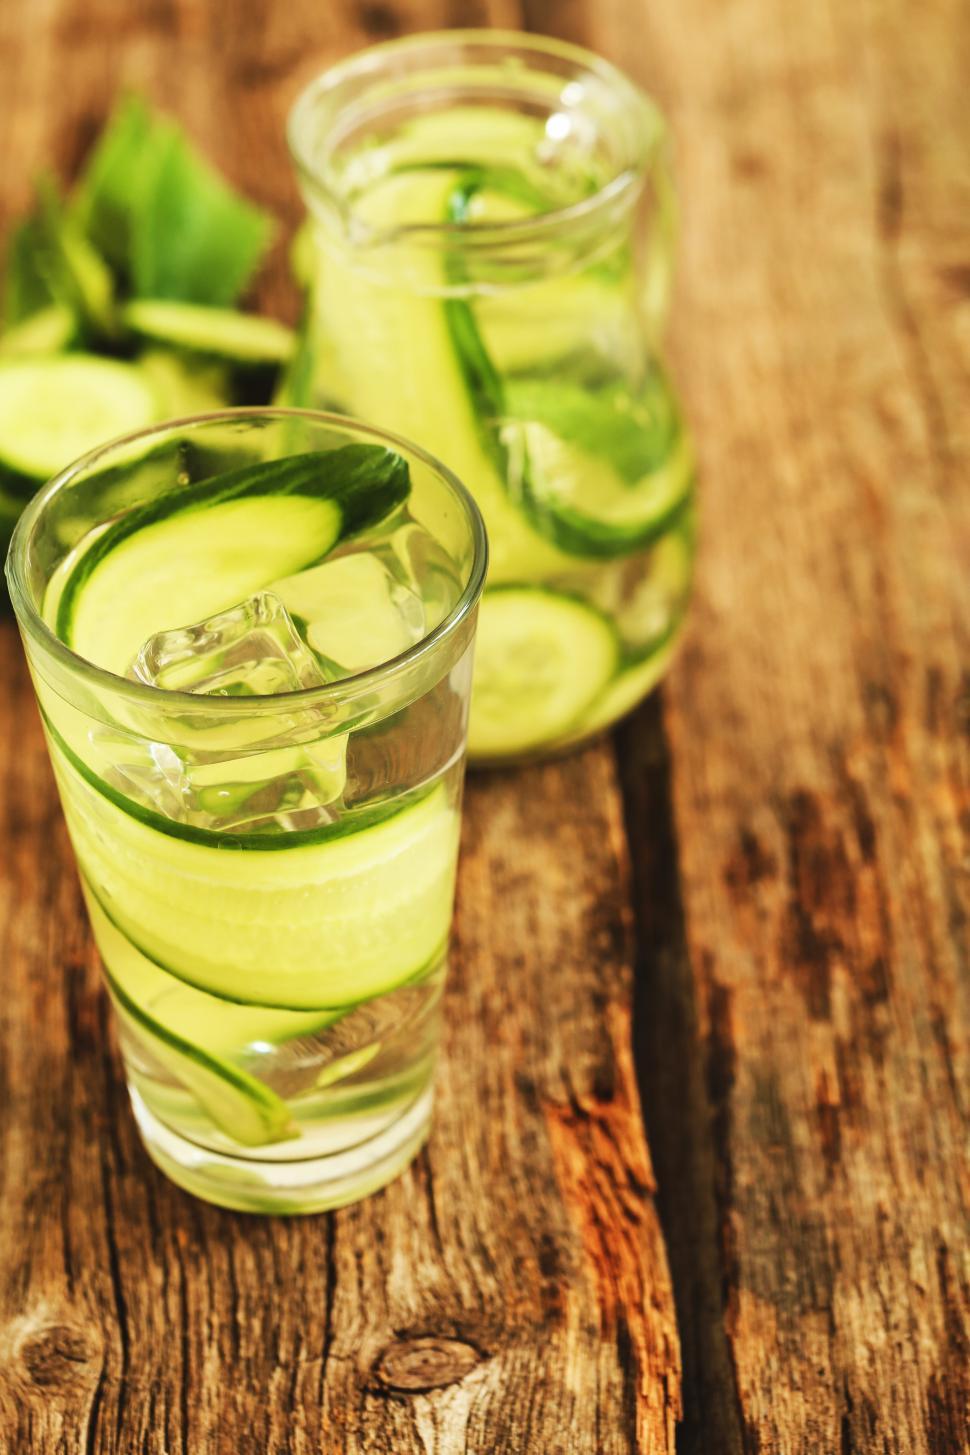 Free Image of Cucumber infused drinks on wooden table 